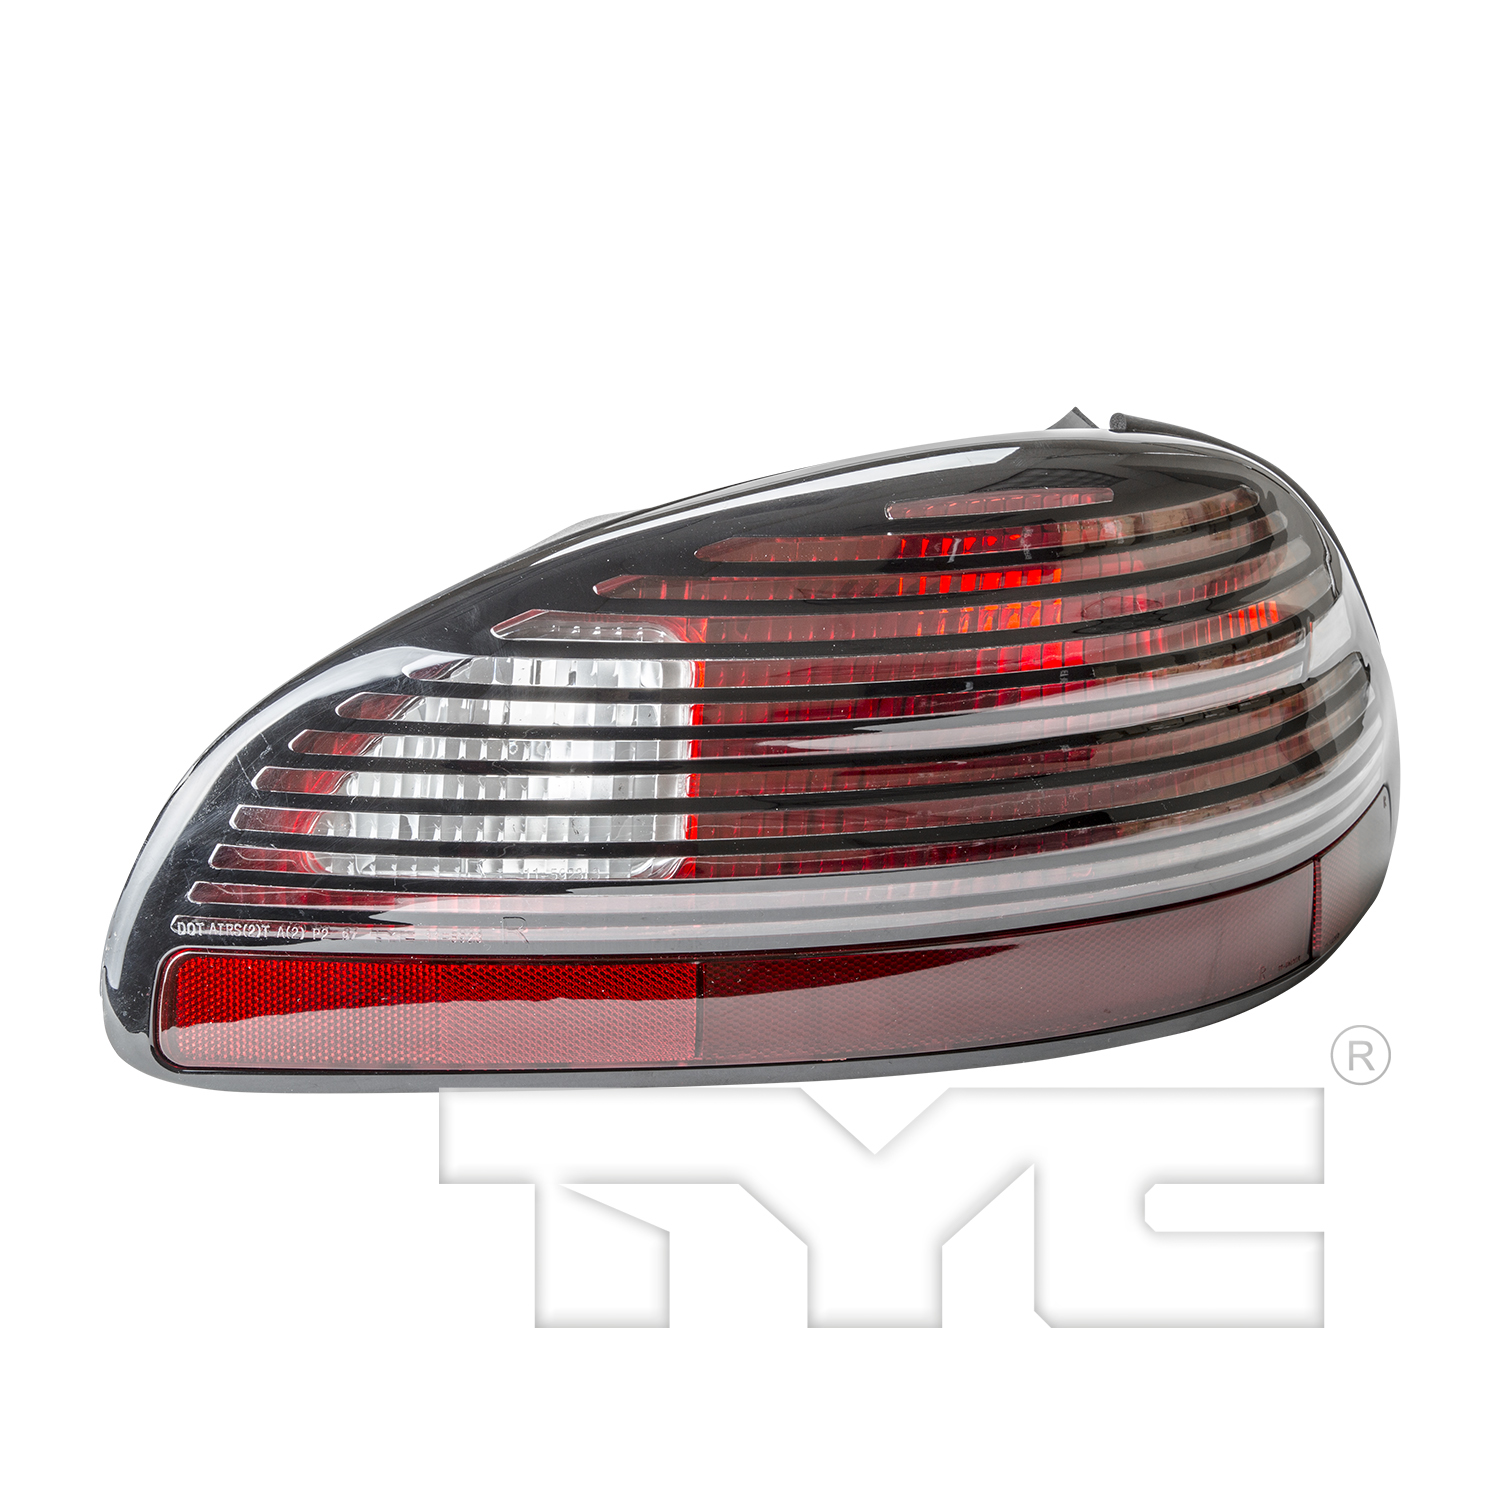 Aftermarket TAILLIGHTS for PONTIAC - GRAND PRIX, GRAND PRIX,97-03,RT Taillamp lens/housing